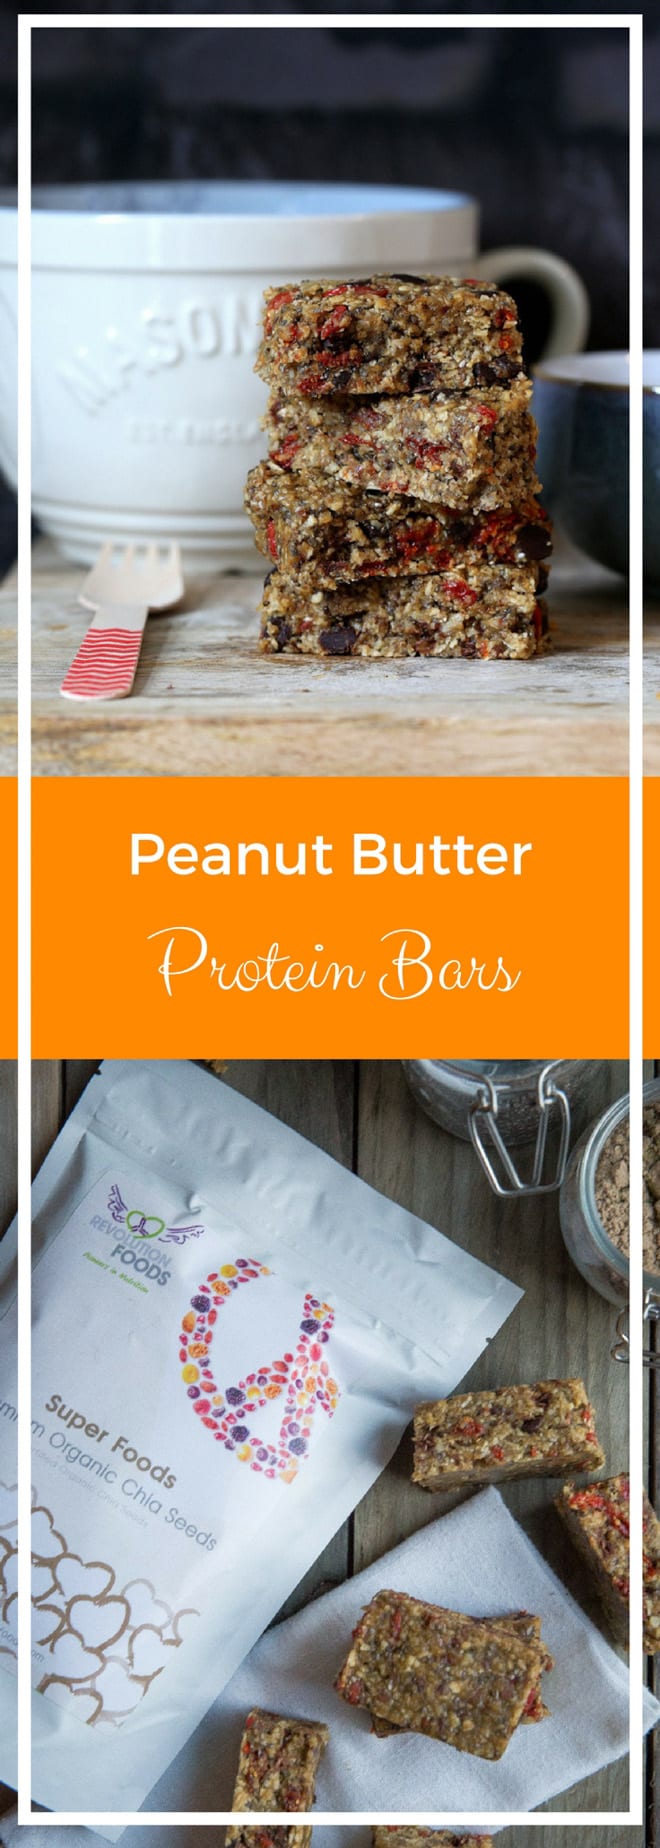 Peanut Butter Protein Bars - Life's too short to not have tried these - there's not a week goes by that these aren't in our fridge at some point as they're the PERFECT post workout treat! | thecookandhim.com